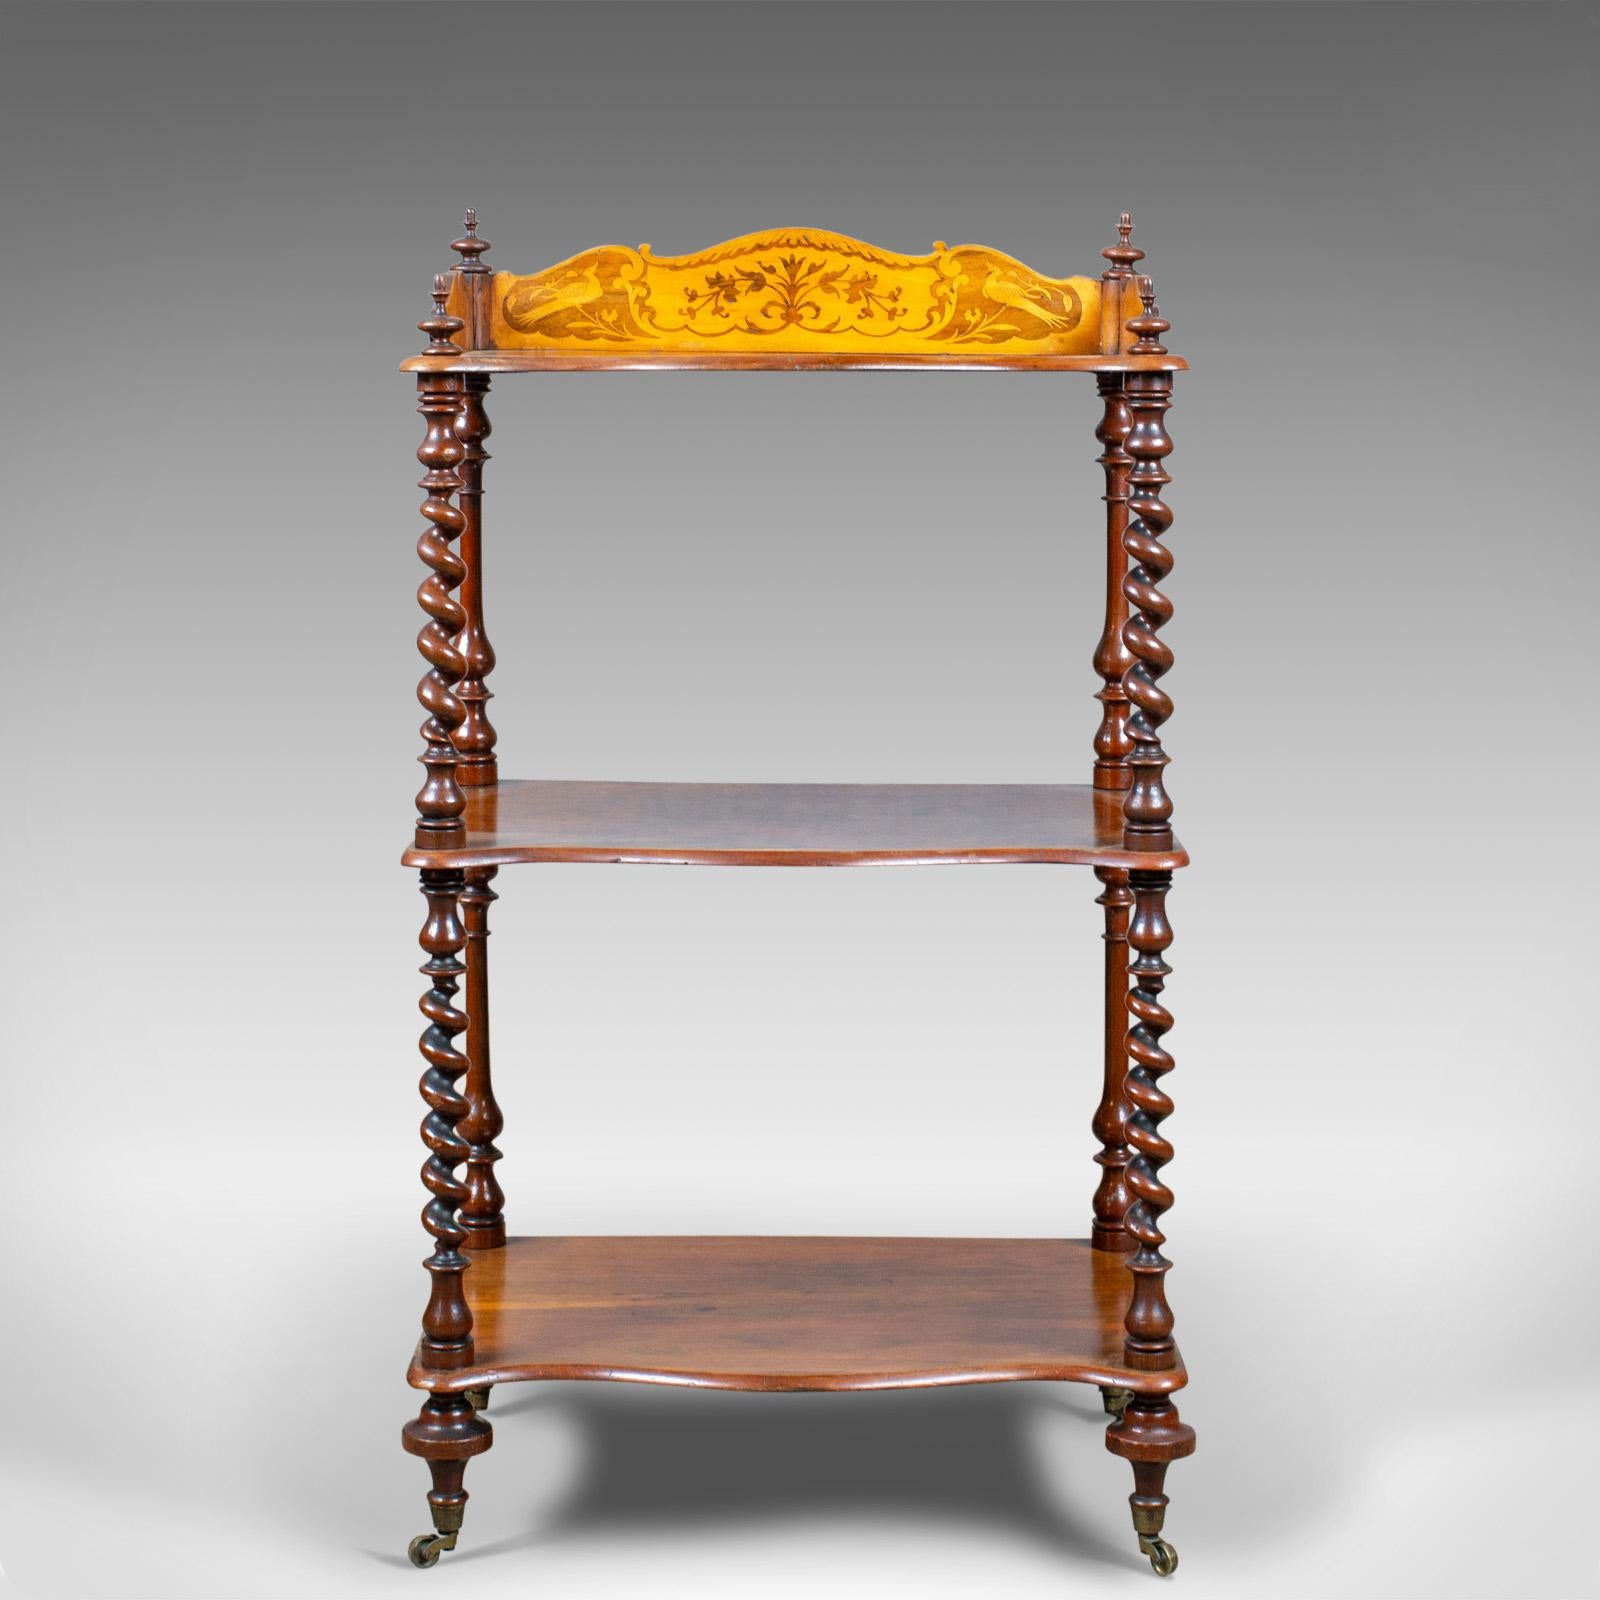 This is an antique whatnot, an English, walnut, three-tier, Victorian display stand dating to the mid 19th century, circa 1850. 

Delightful, rich tones to the select walnut
Good consistent colour in the wax polished finish
Grain interest with a